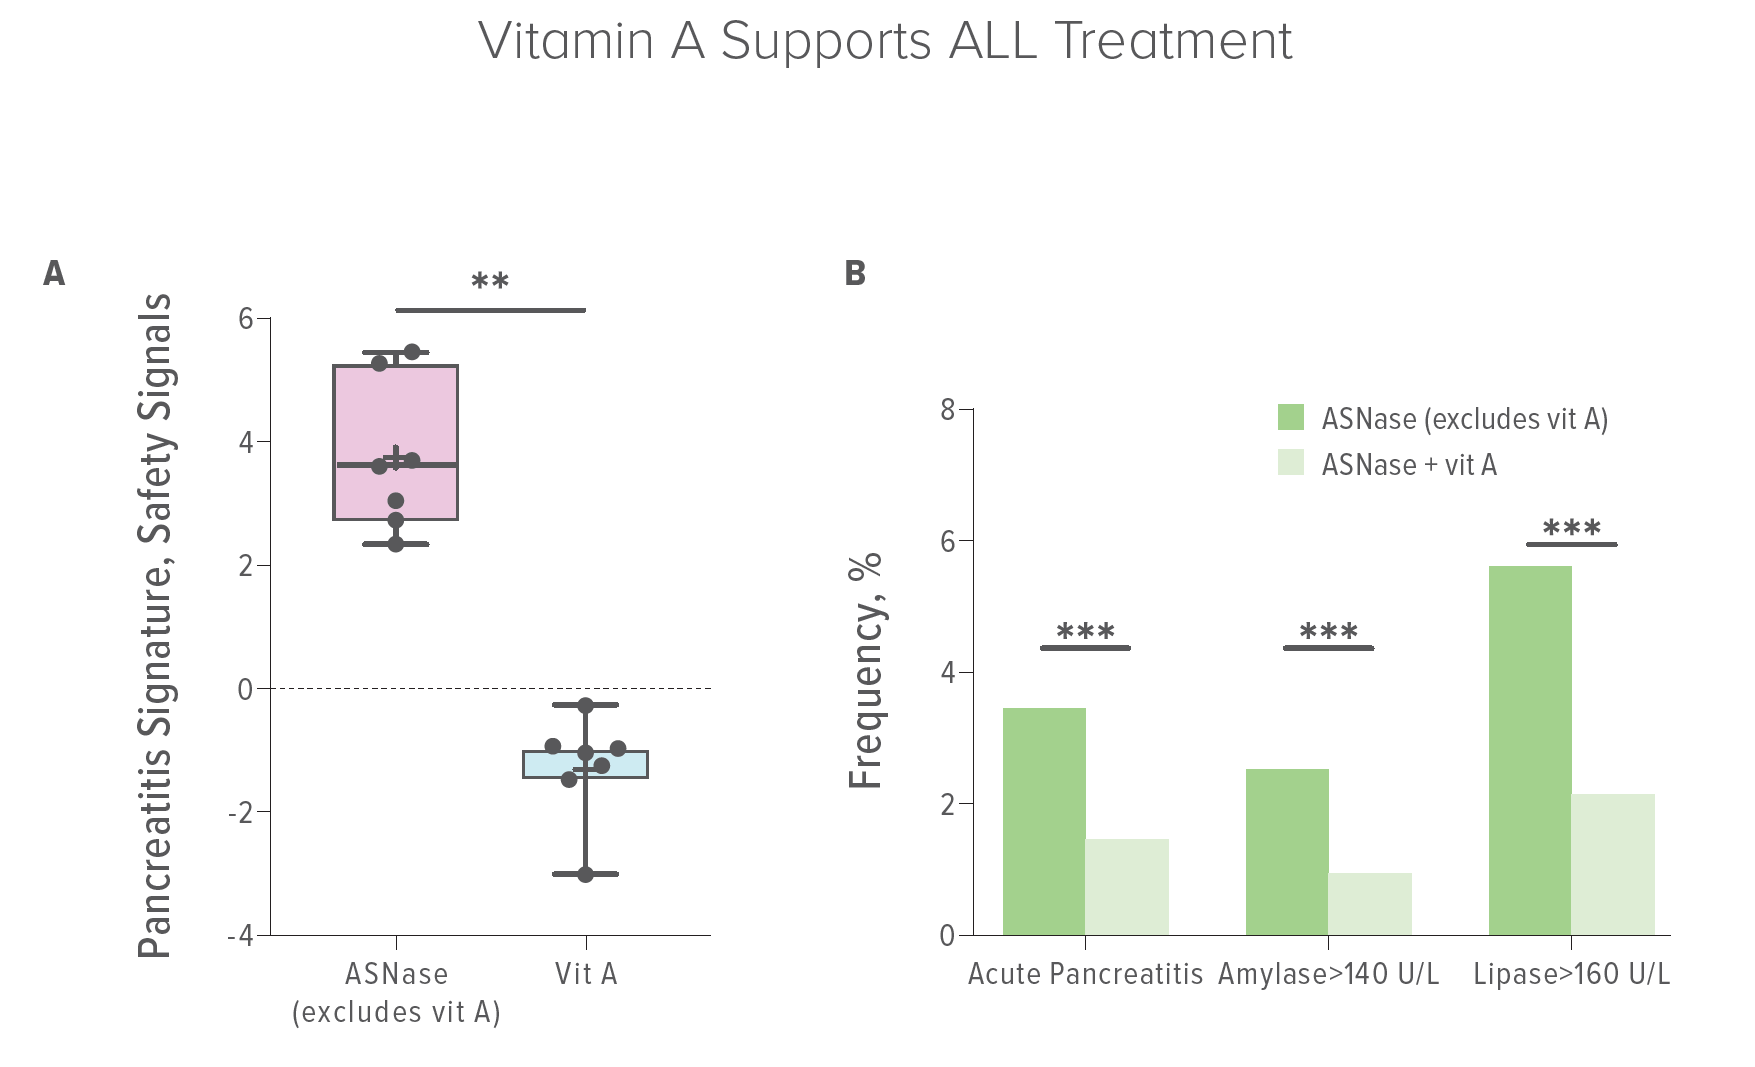 Fig A: Pancreatitis safety signals are significantly lower in vitamin A than asparaginase in FAERS data analysis. Fig B: EHR data analysis showed a 60% reduction in pancreatitis among the asparaginase with vitamin A cohort. When people being treated for ALL get enough vitamin A, their risks of developing asparaginase-associated pancreatitis can be reduced.